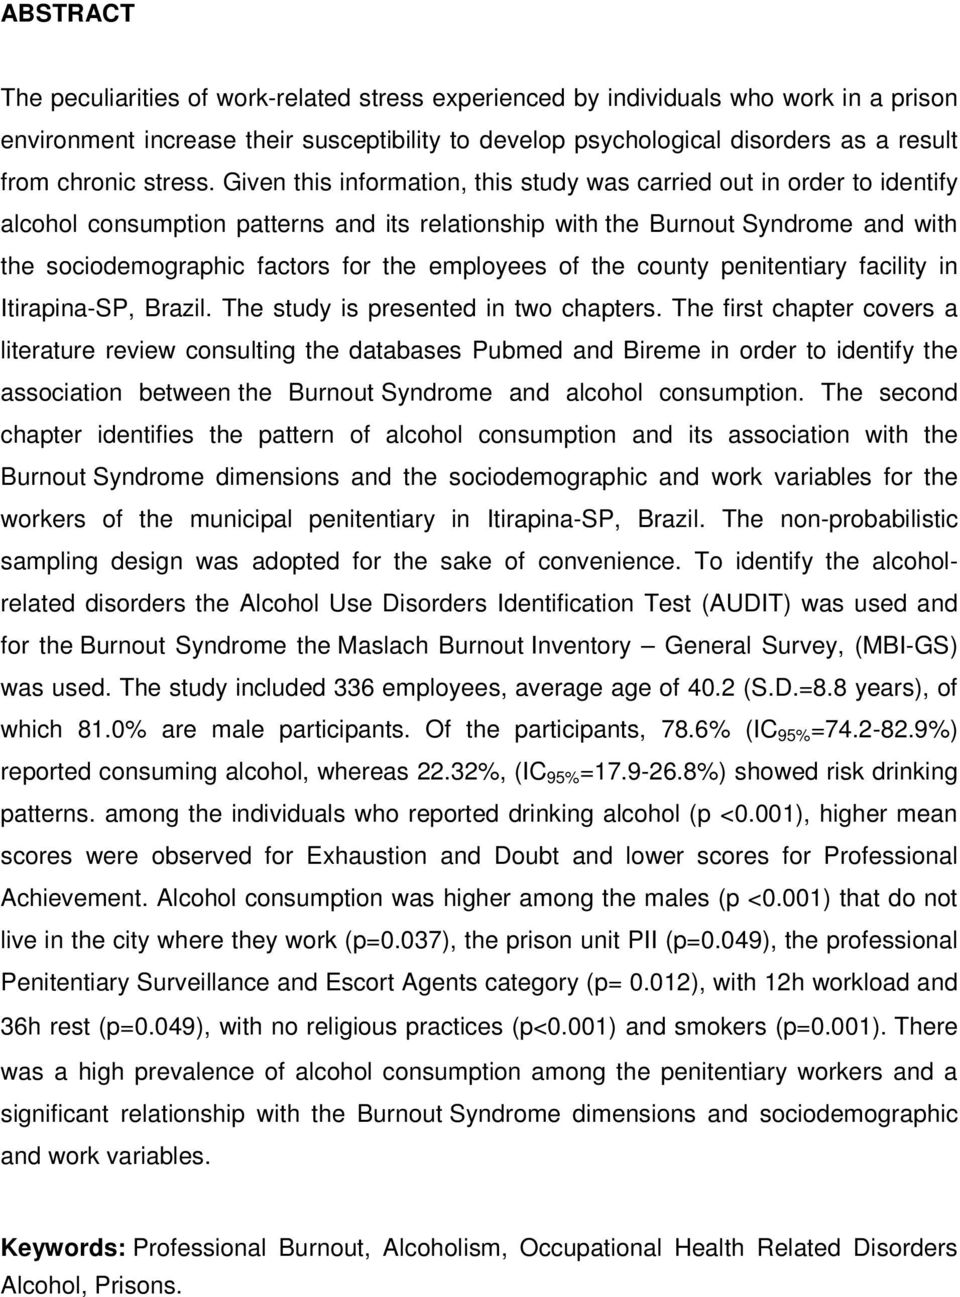 Given this information, this study was carried out in order to identify alcohol consumption patterns and its relationship with the Burnout Syndrome and with the sociodemographic factors for the